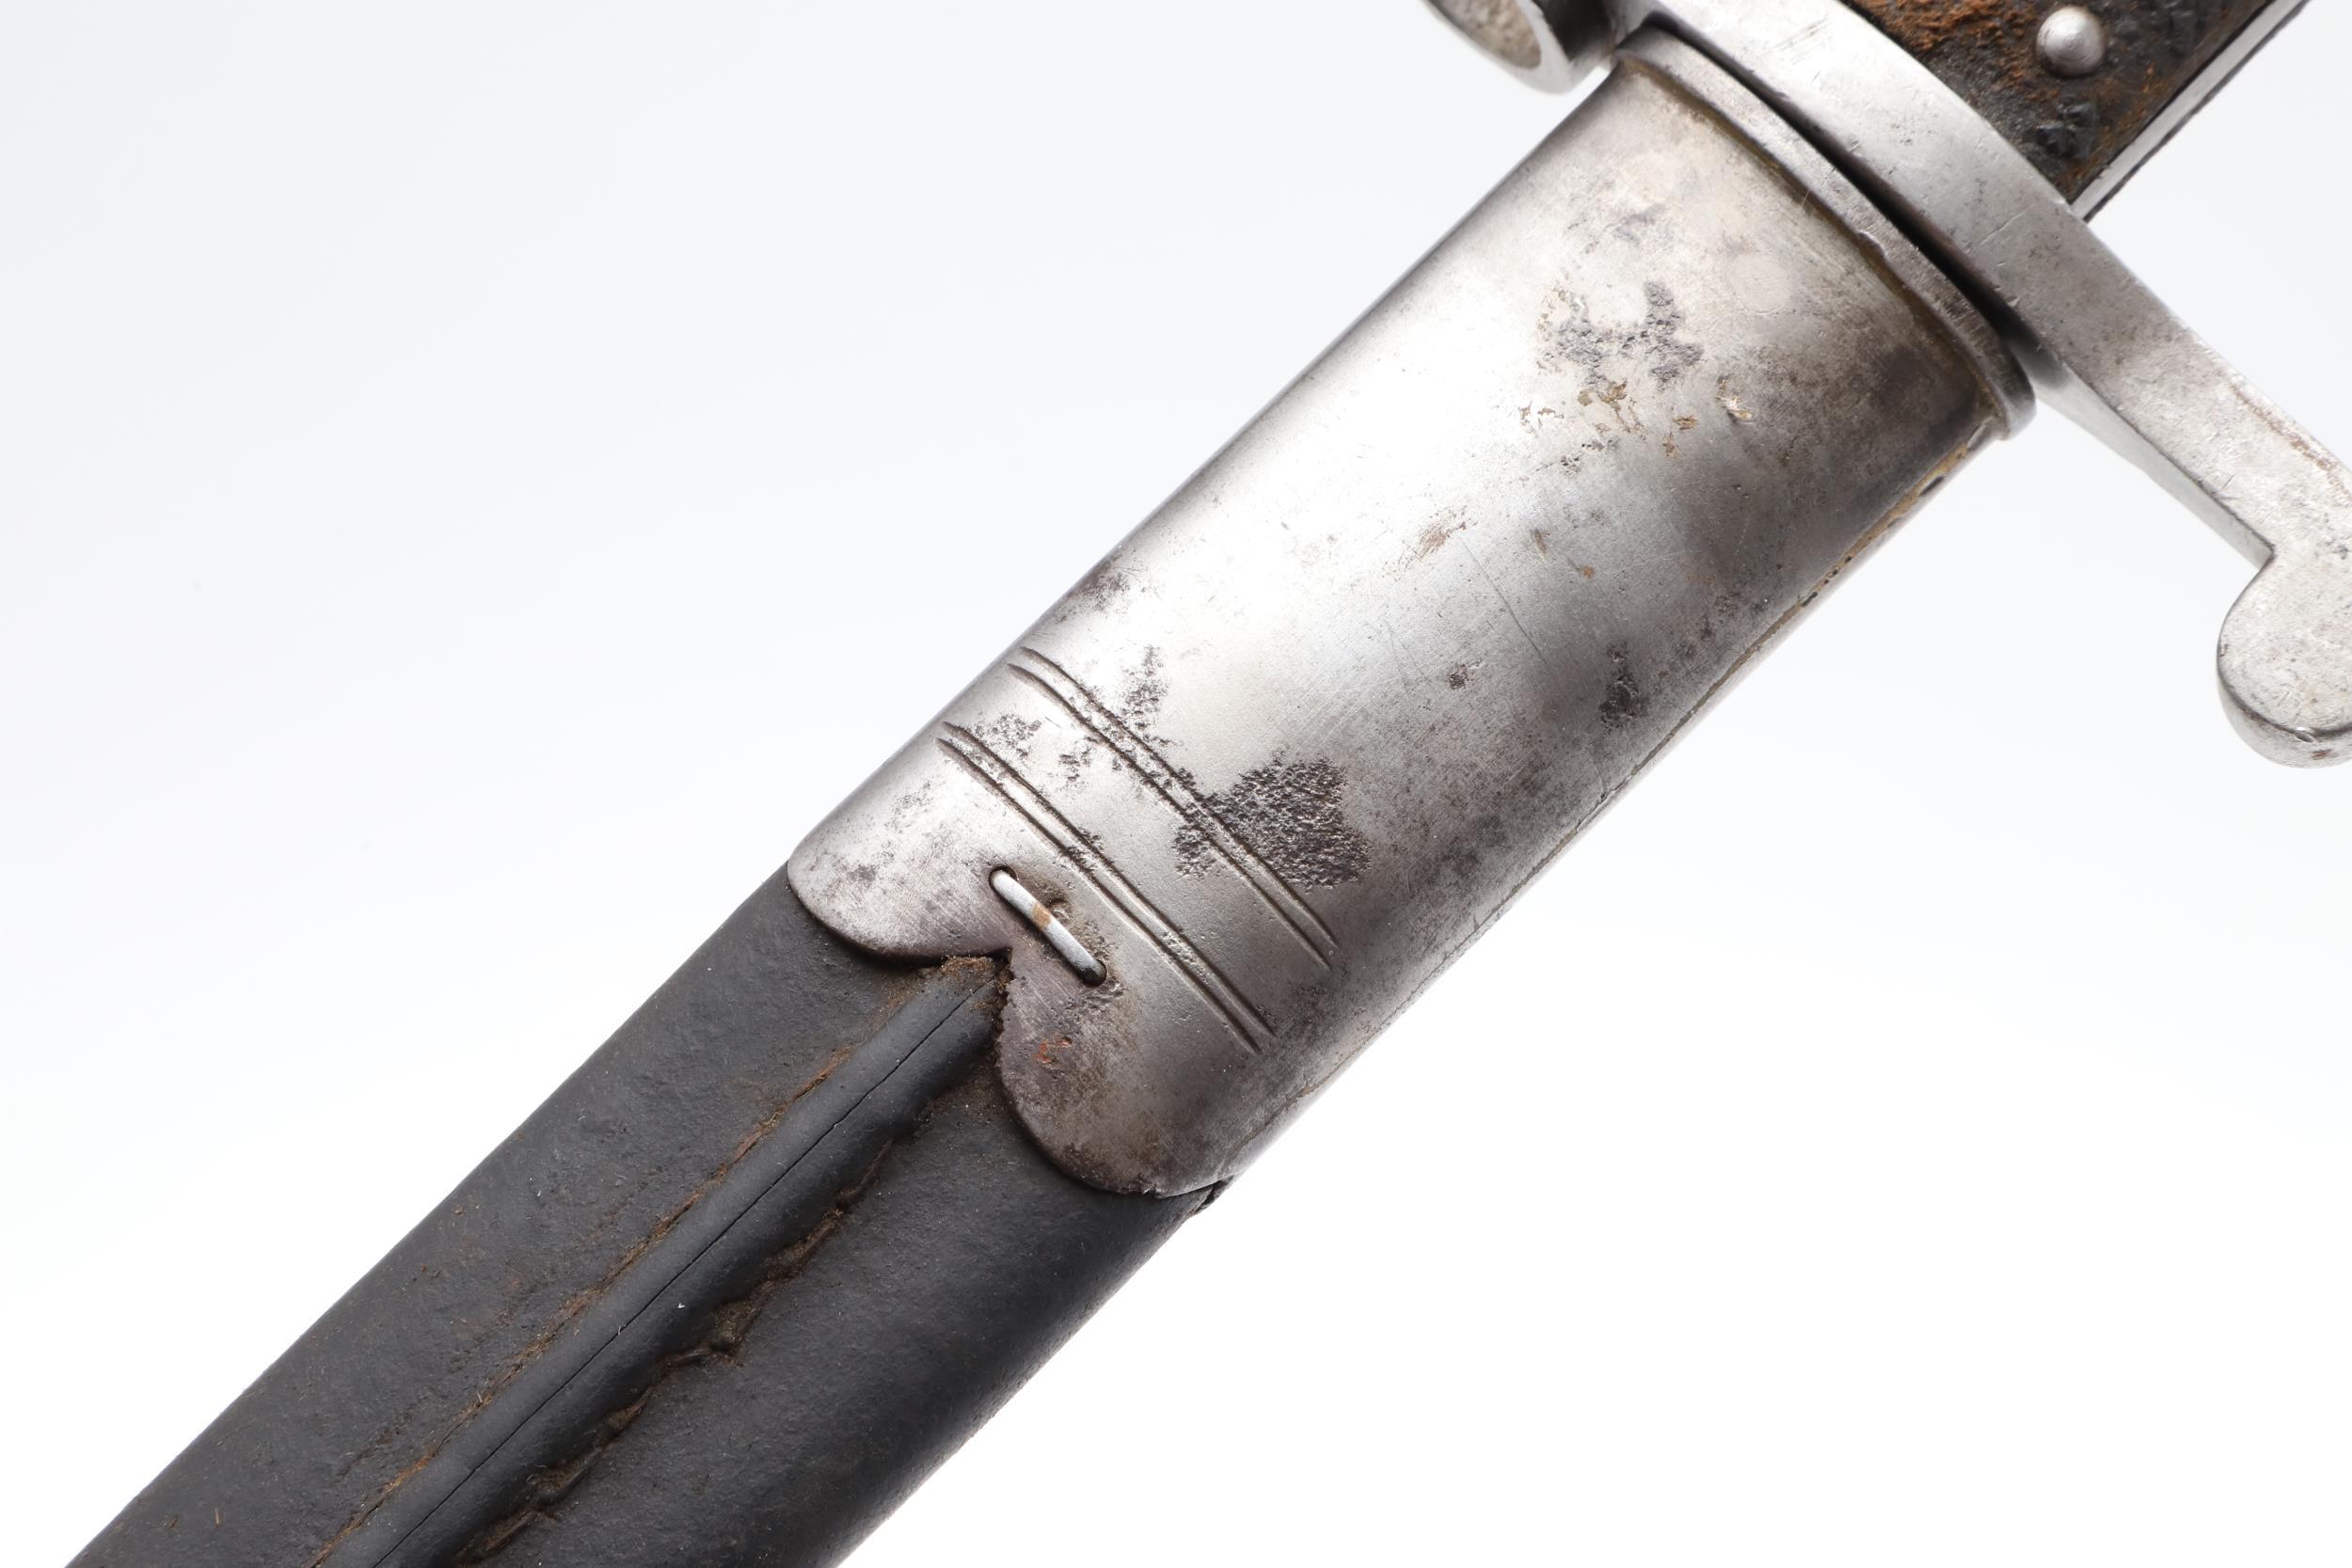 A VICTORIAN MARTINI HENRY 1887 PATTERN BAYONET AND SCABBARD. - Image 18 of 18